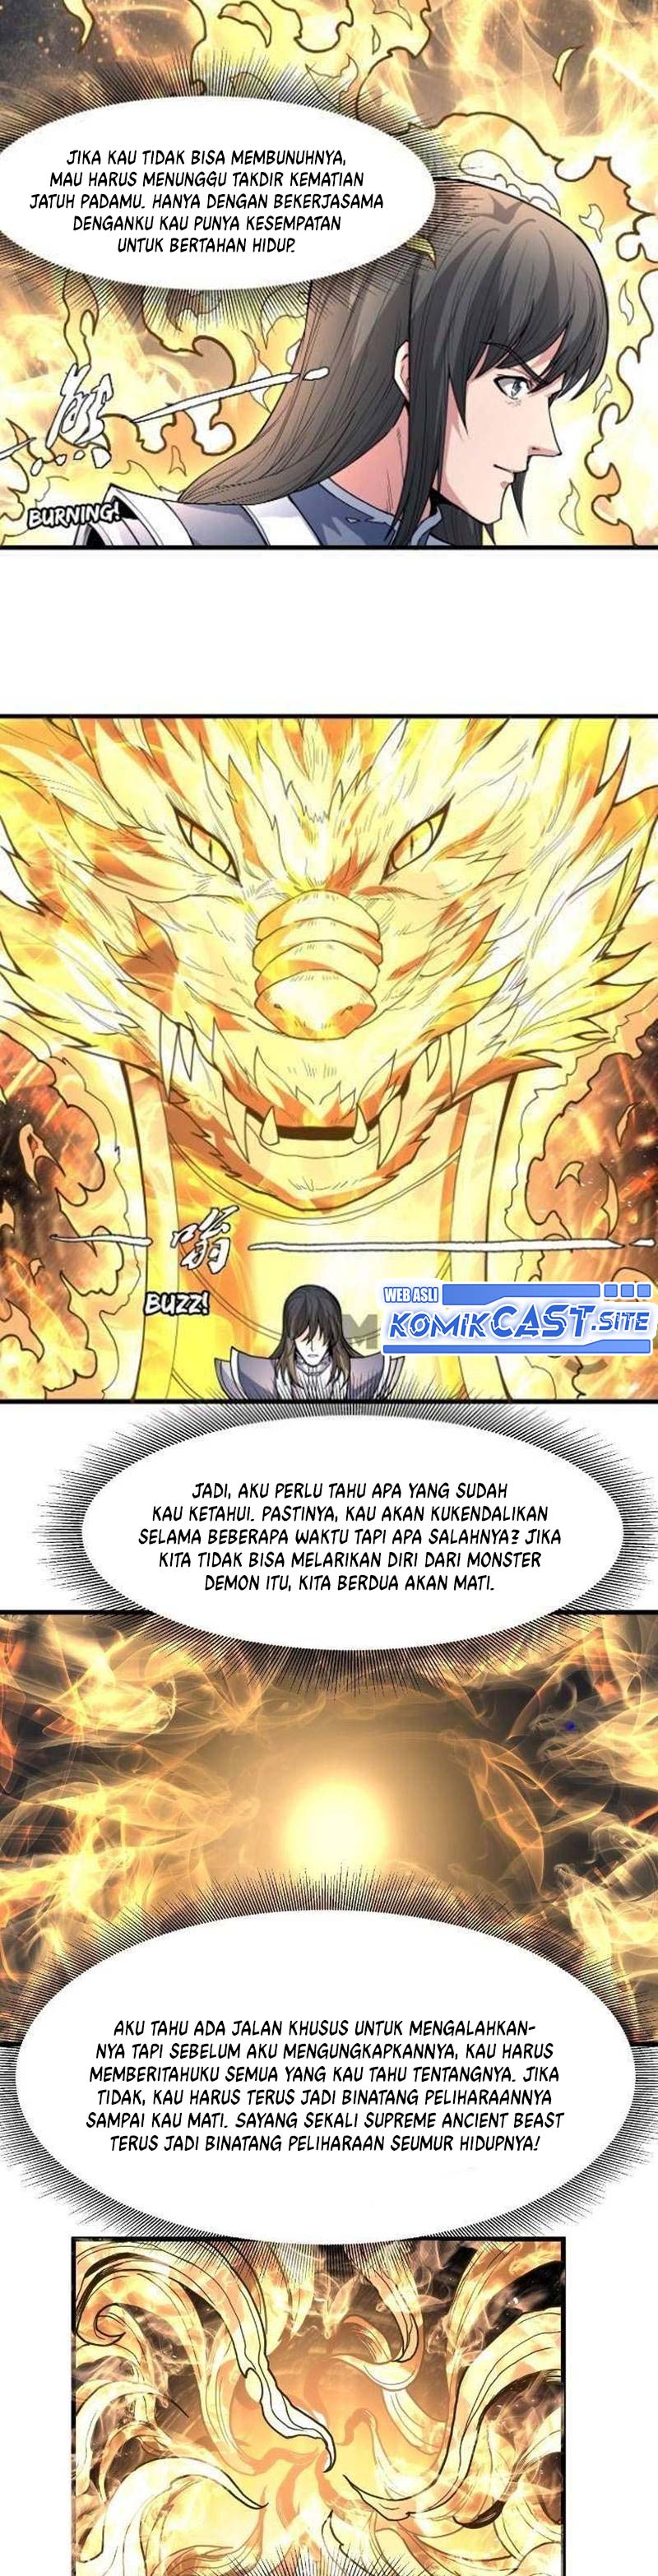 God of Martial Arts Chapter 500 6